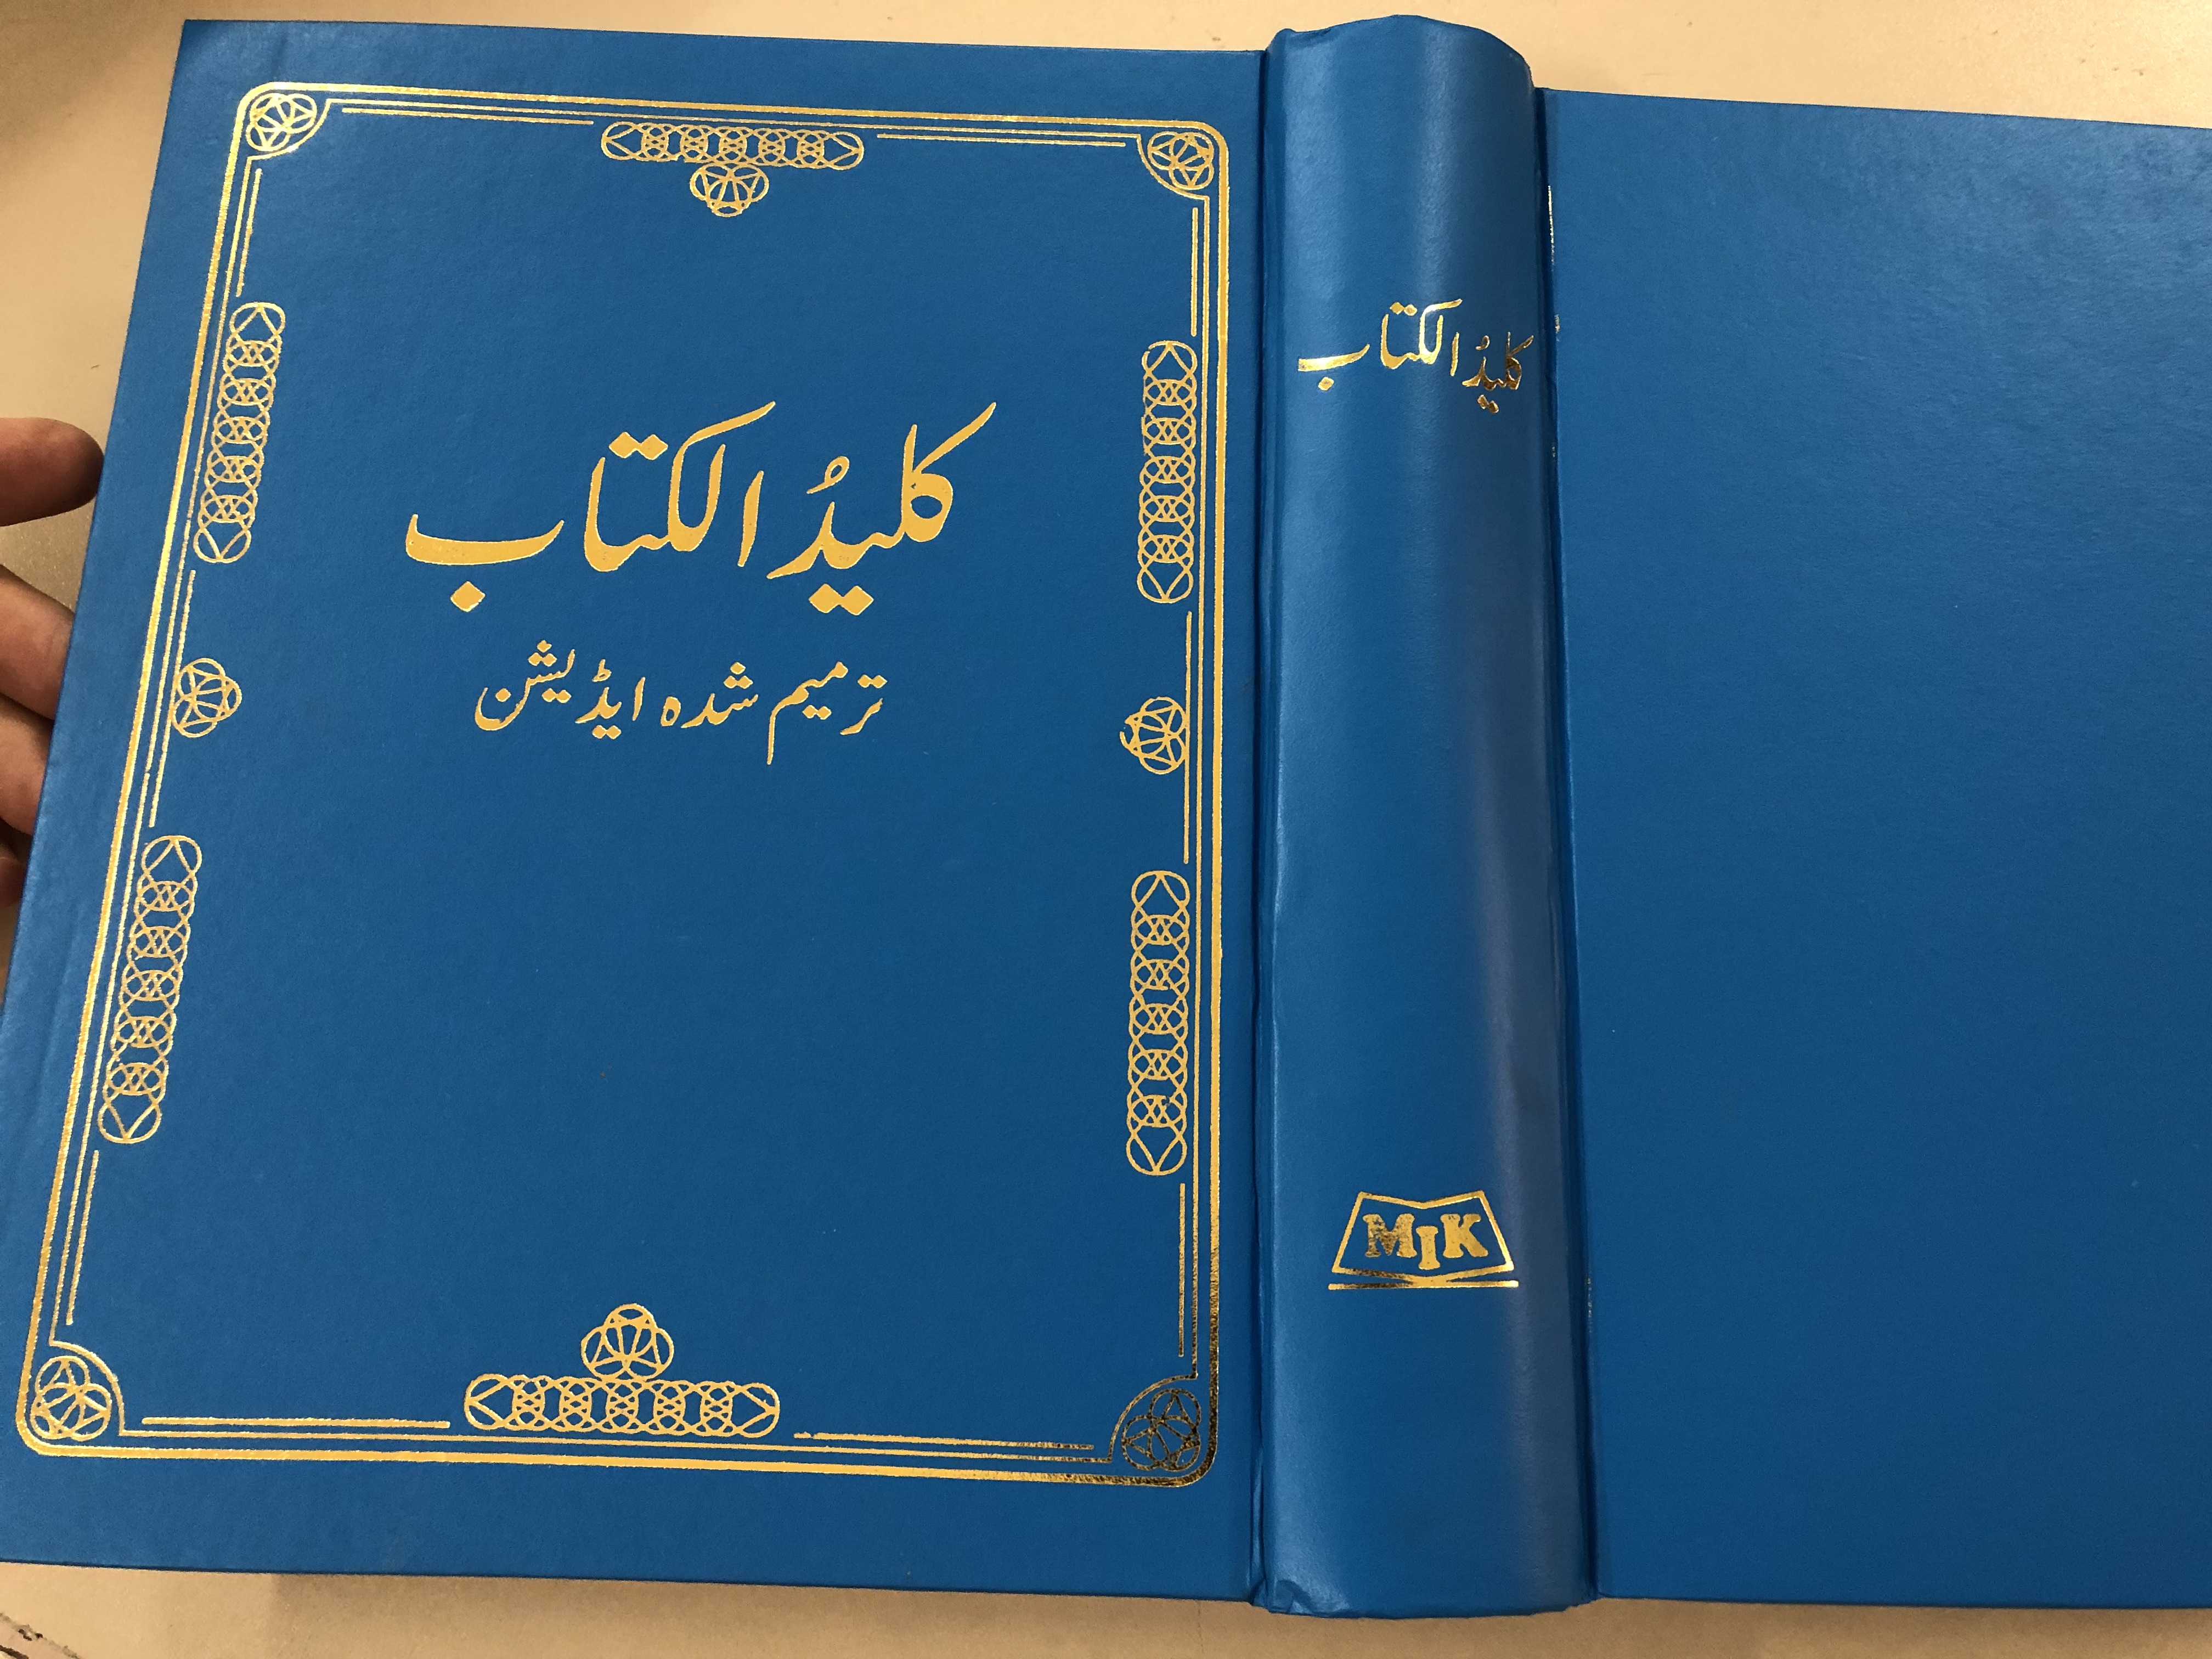 urdu-large-bible-dictionary-blue-cover-by-f.s.-khair-ullah-with-5.000-subjects-from-the-bible-hardcover-with-illustrations-maps-and-diagrams-19-.jpg